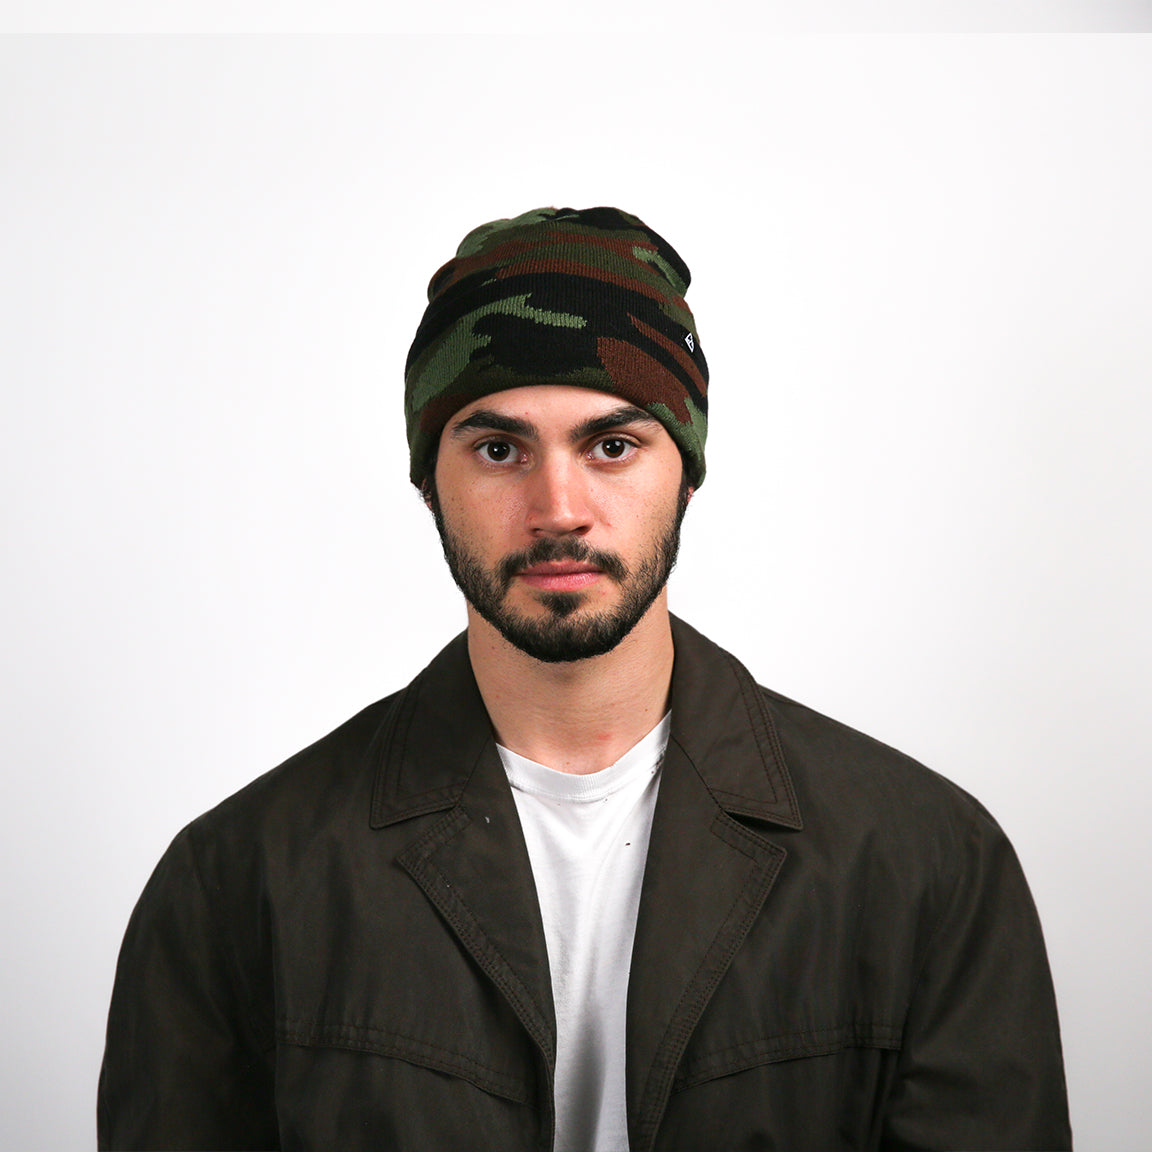 The beanie presented is knitted with a camouflage pattern that blends dark green, brown, and black tones. It is accented by a black stripe near the bottom edge, where a small black logo is also visible. The beanie is designed to fit closely to the head with a slight slouch at the crown.